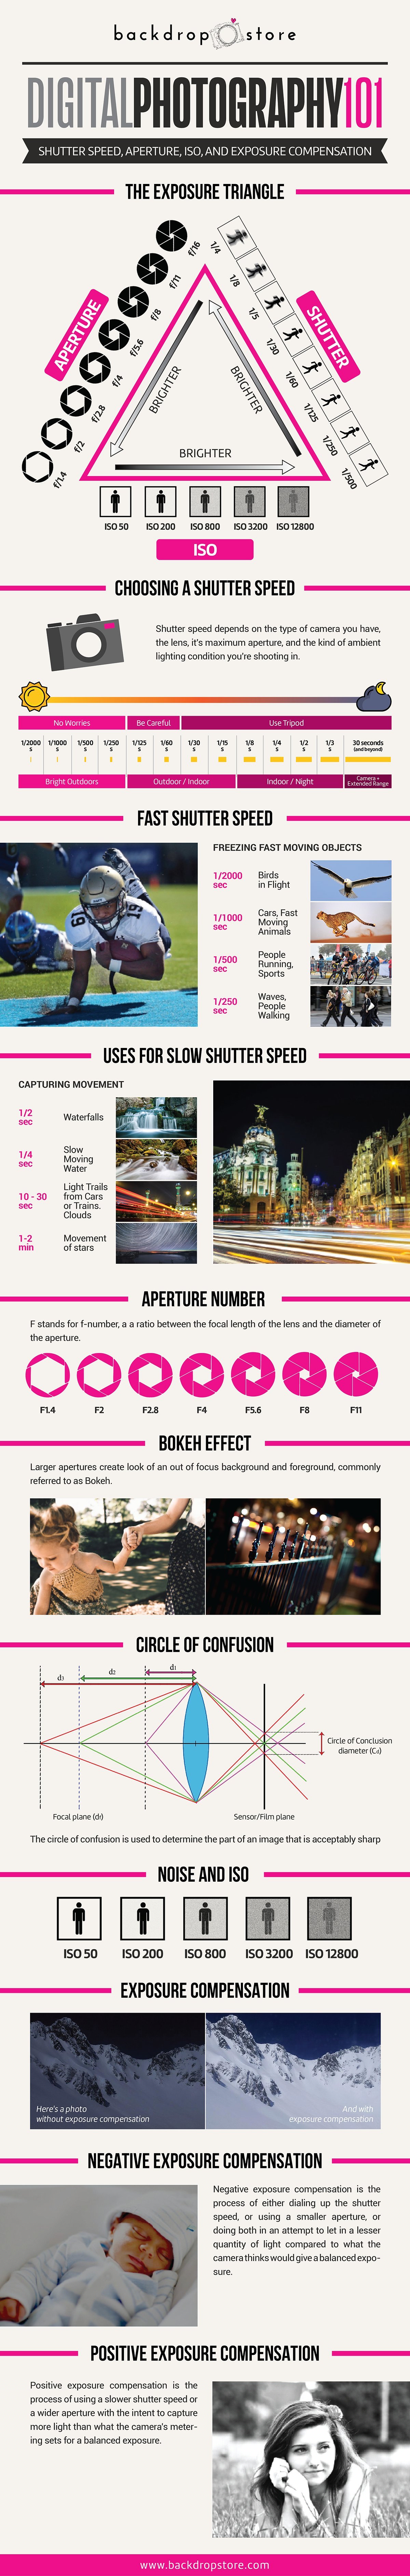 digital photography infographic